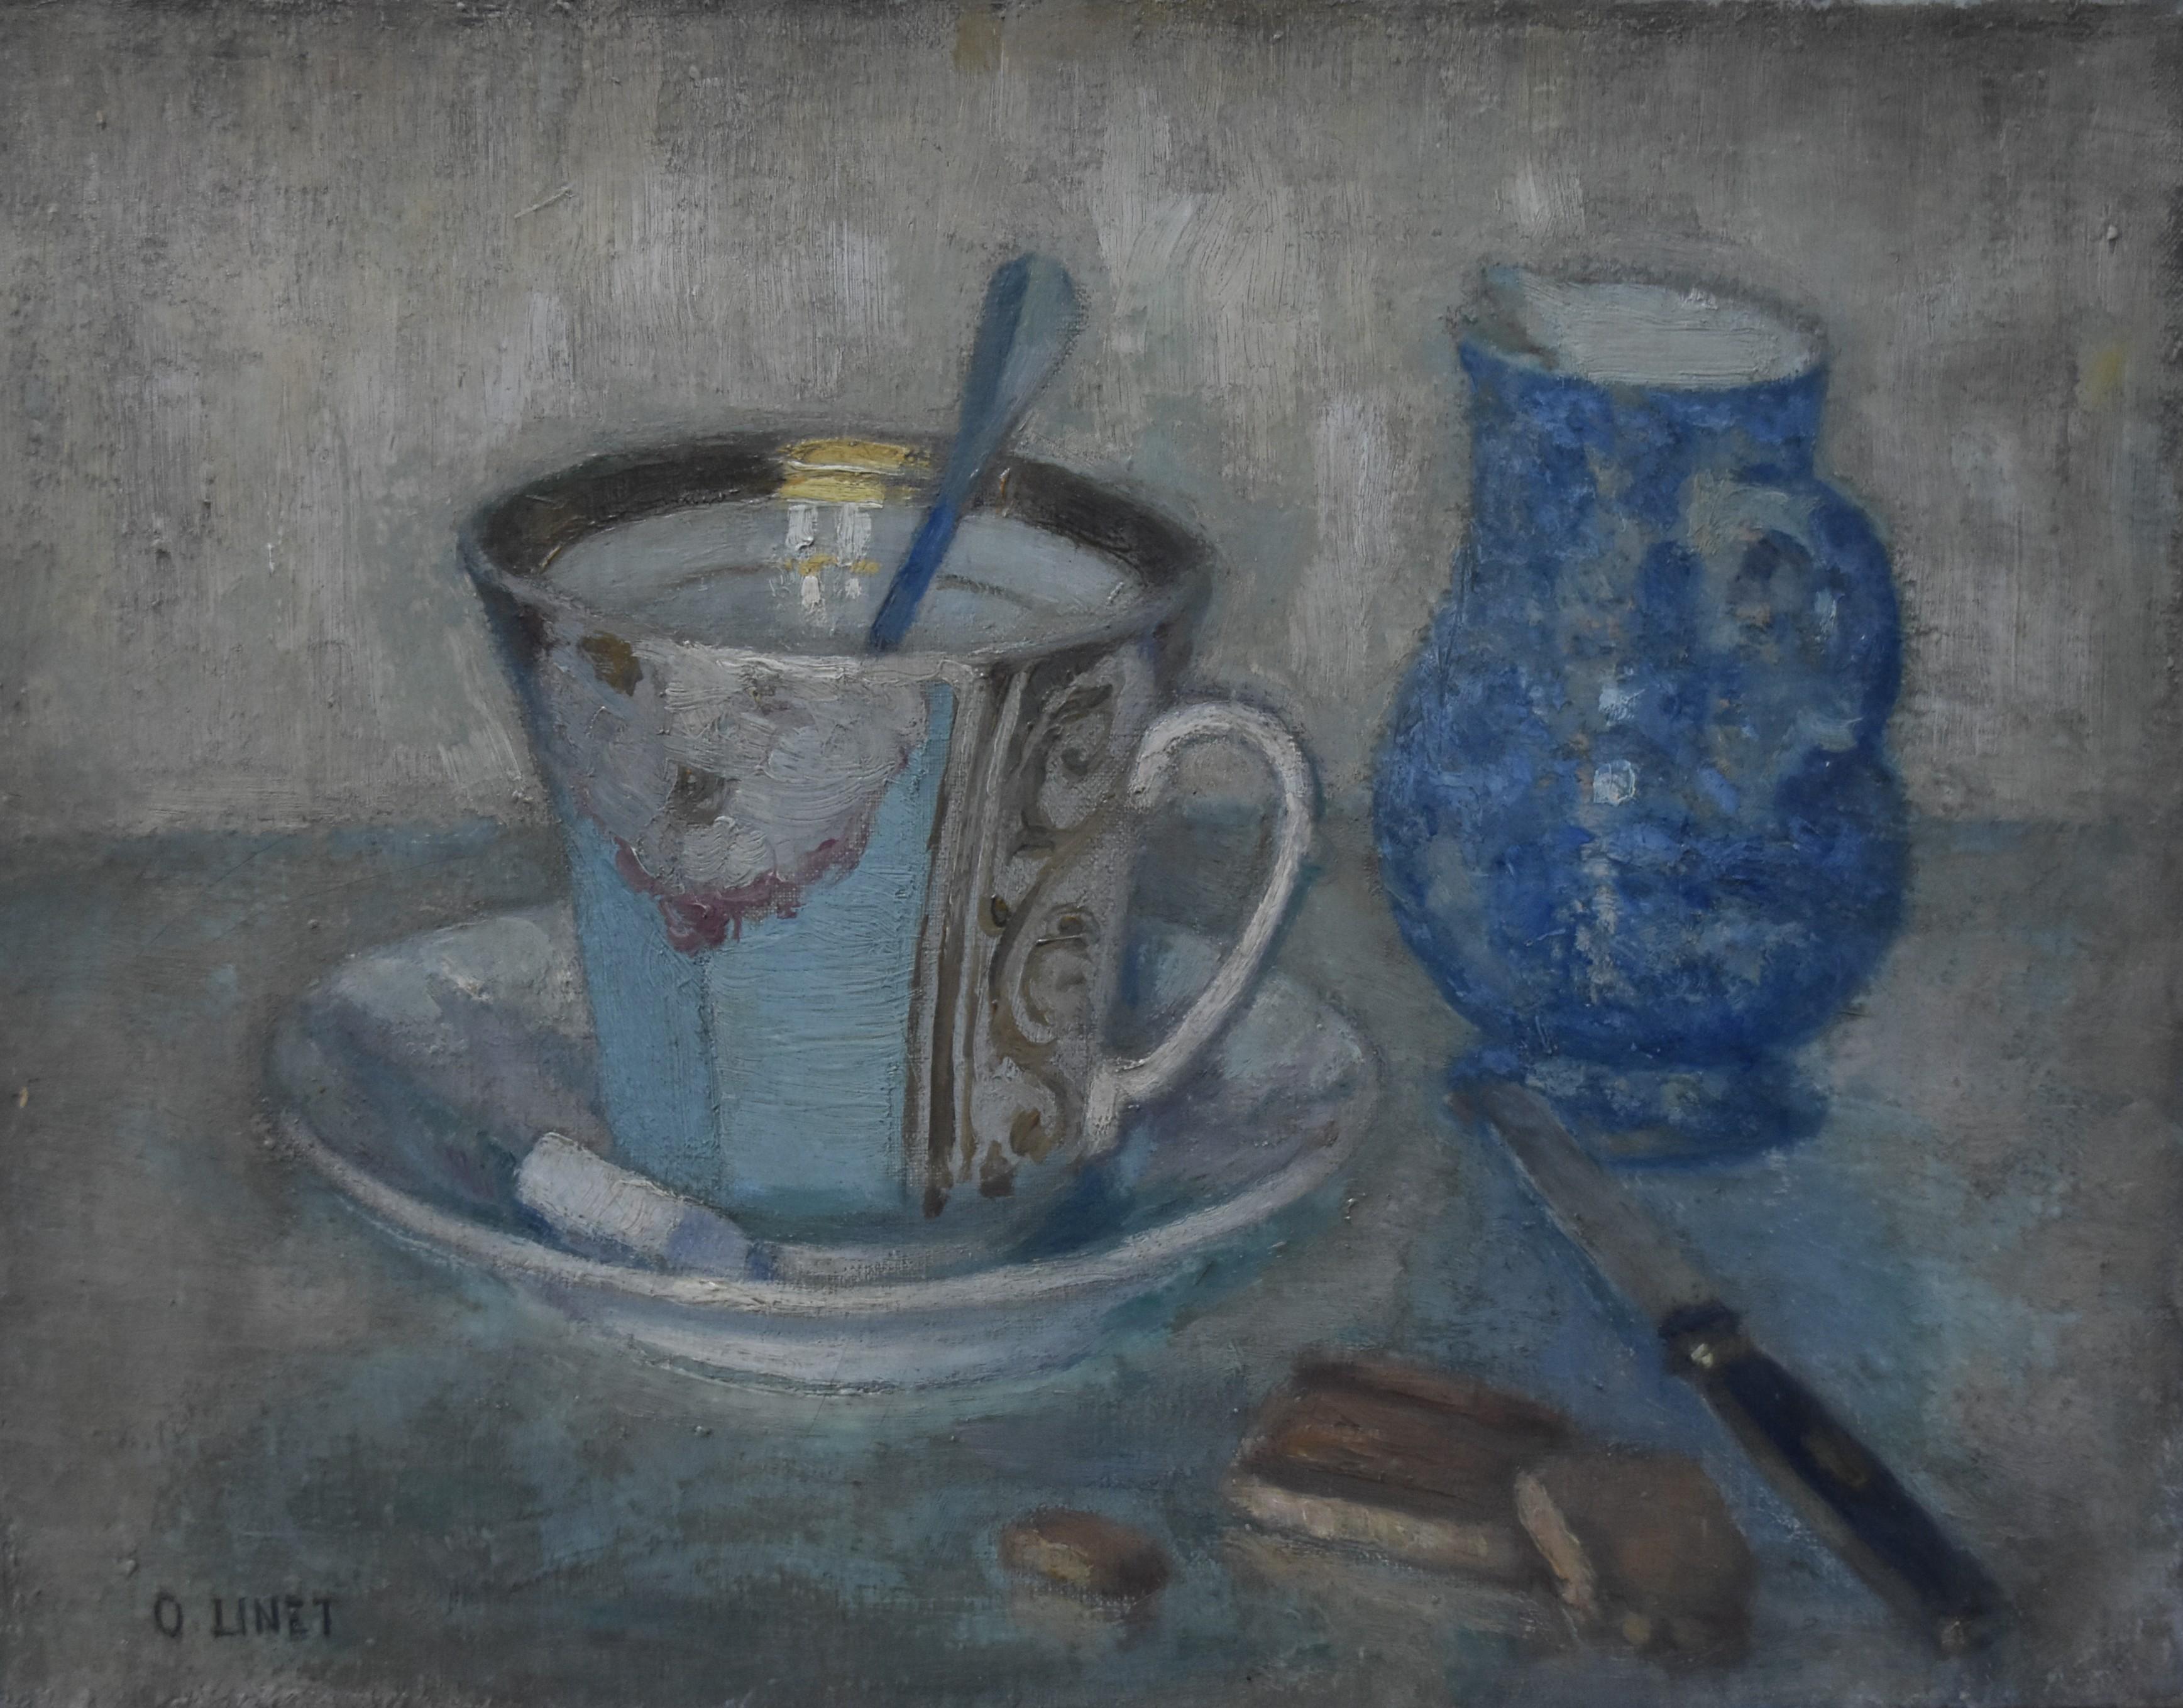 Octave Linet (1870-1962) 
Still life with a cup
signed  lower left
oil on canvas
27 x 34,7 cm
In good condition 
In a modern frame  : 33 x 41 cm

Octave Linet was a French painter born in Bléré (Indre-et-Loire) on 25 September 1870 and died in Paris